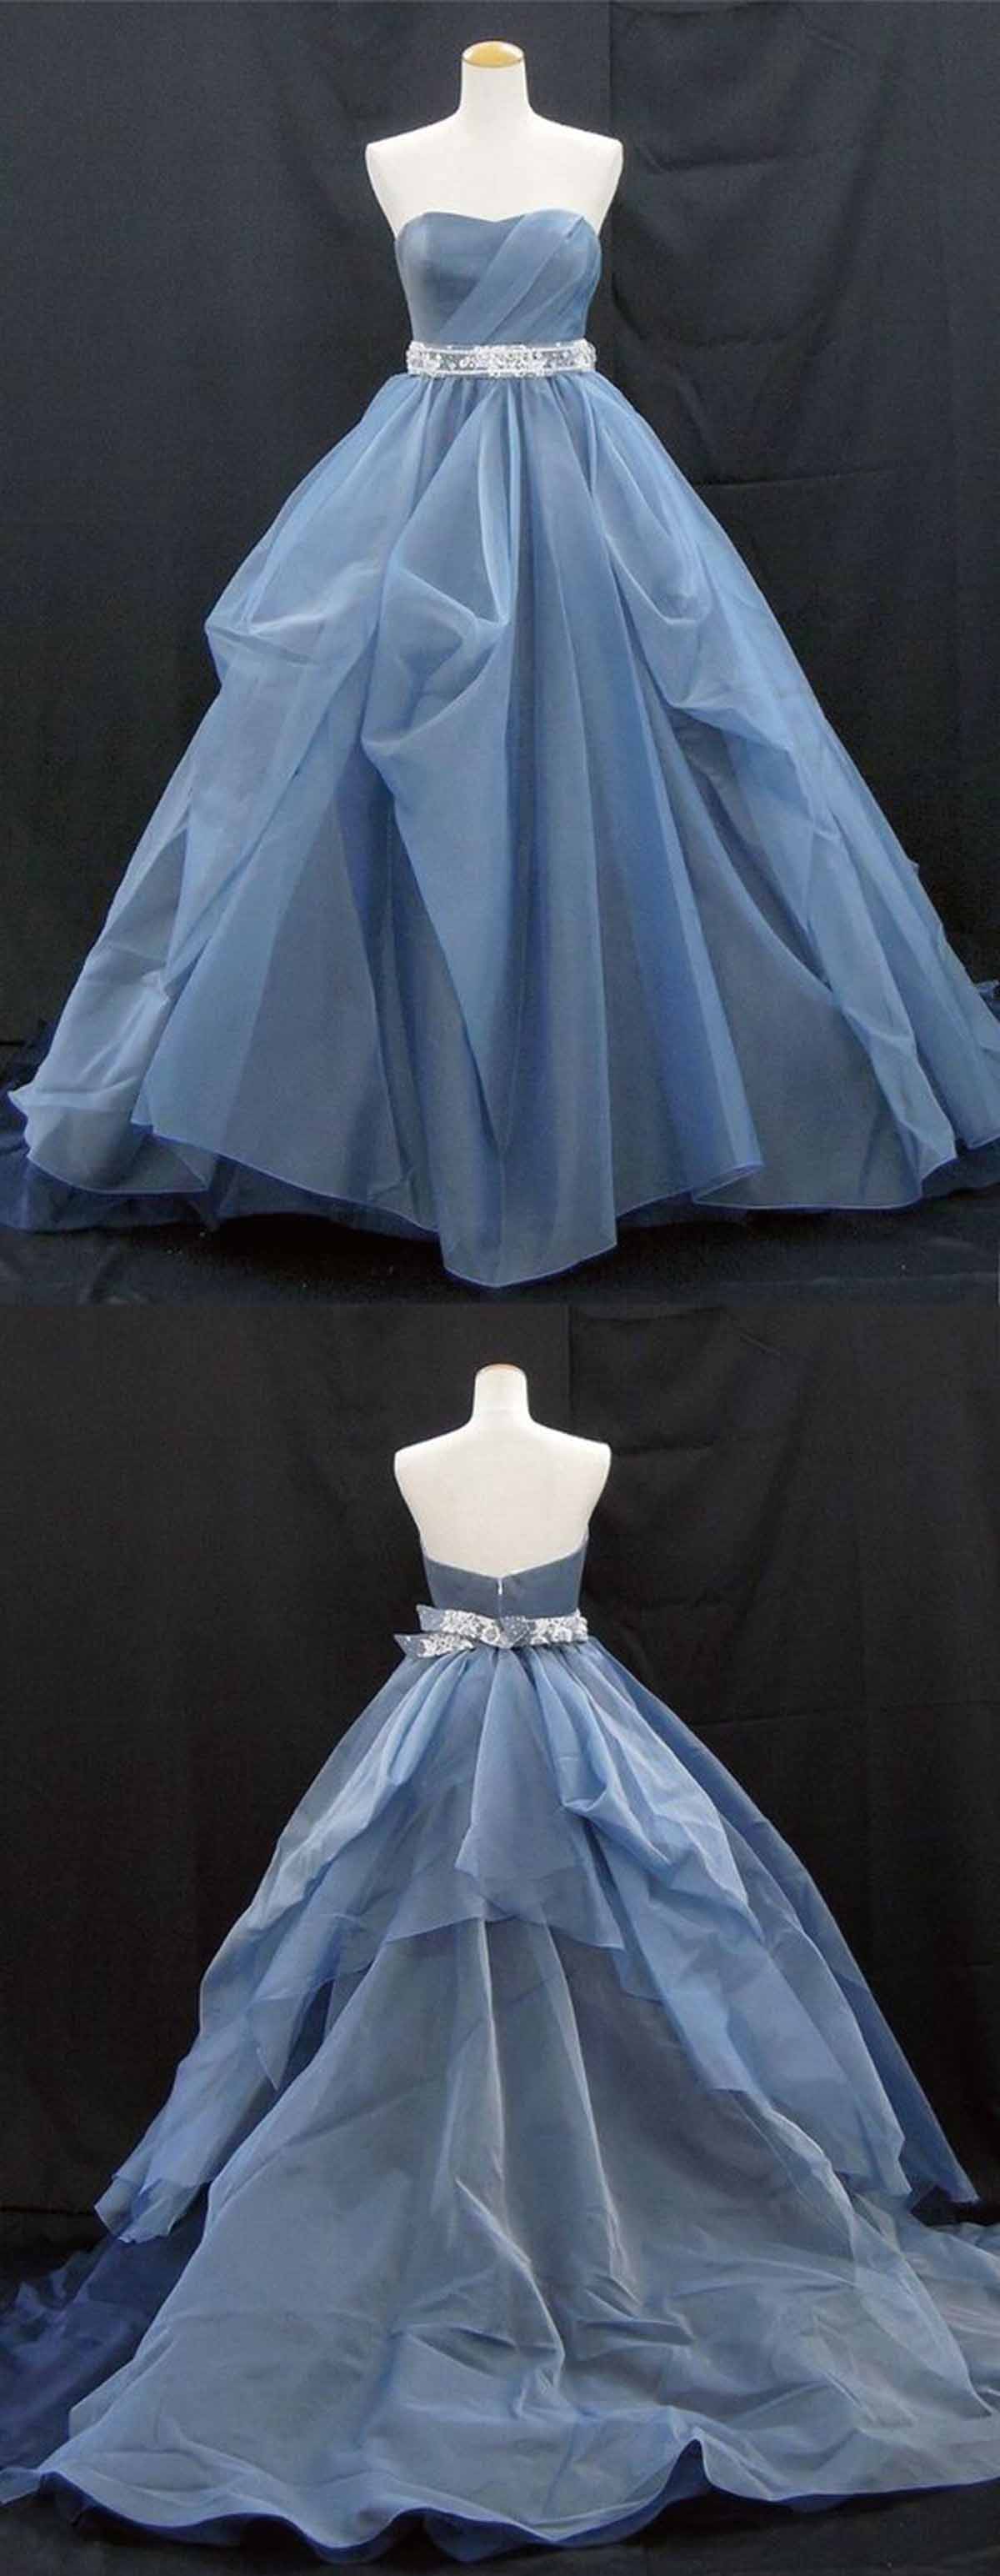 Sweetheart Neck Deep Blue Tulle Long A-line Formal Prom Dress With Lace Belt